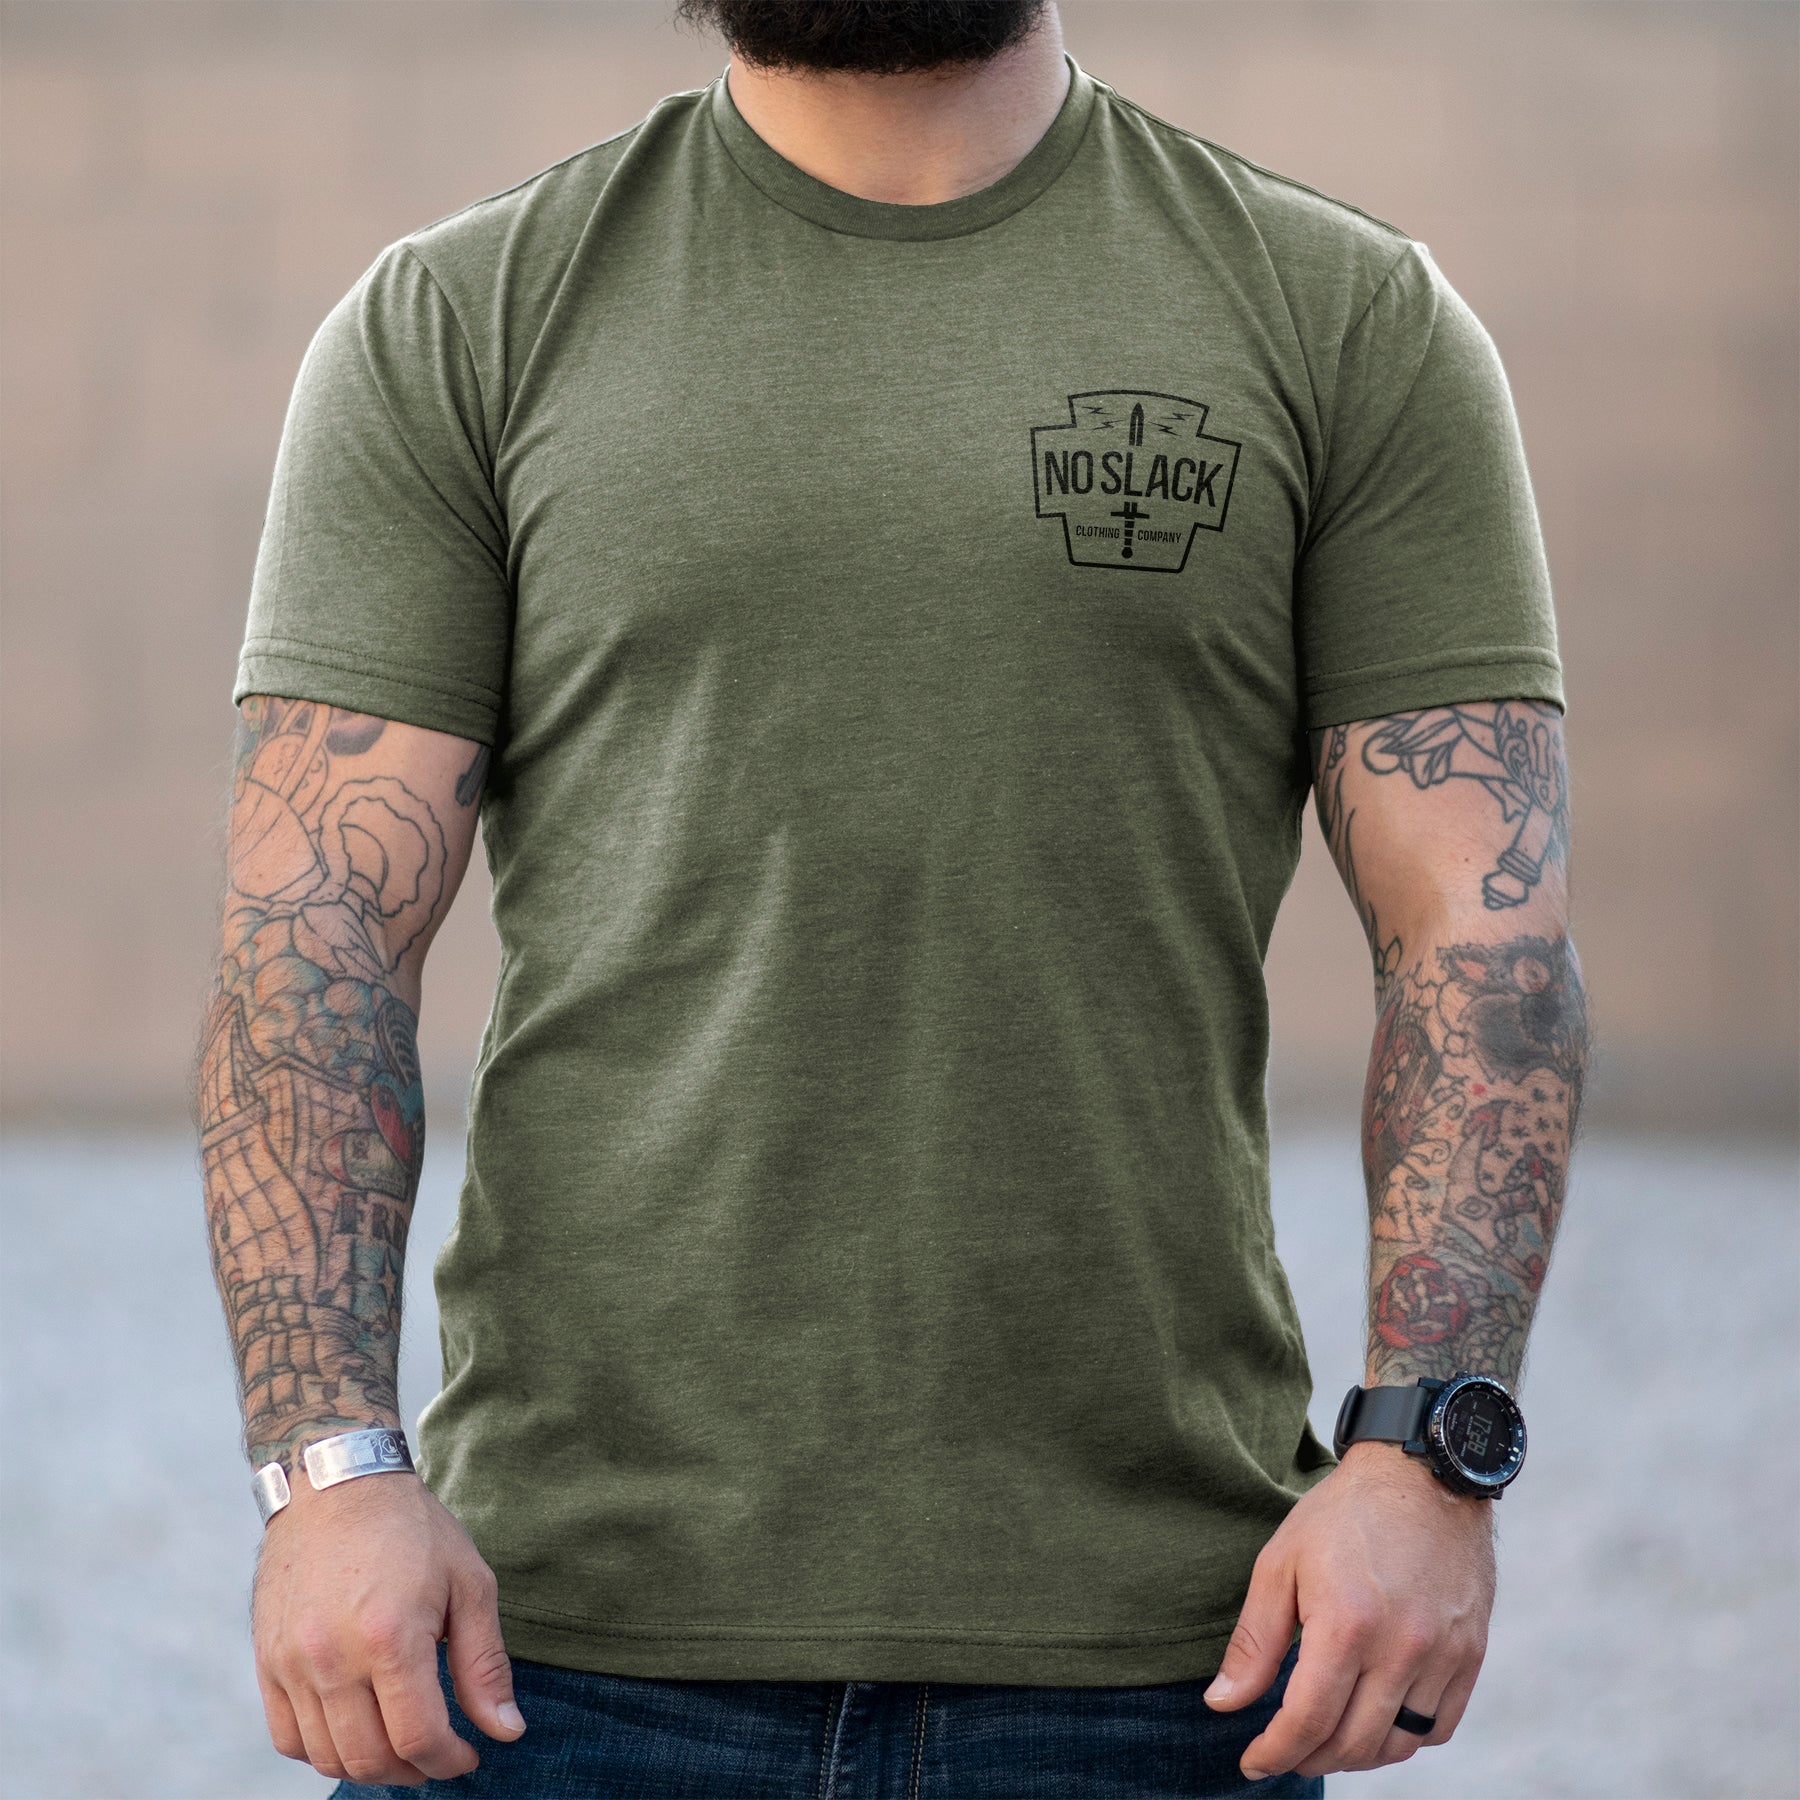 Gritty Patriotic Fitness Clothing: No Slack Rifle Tee